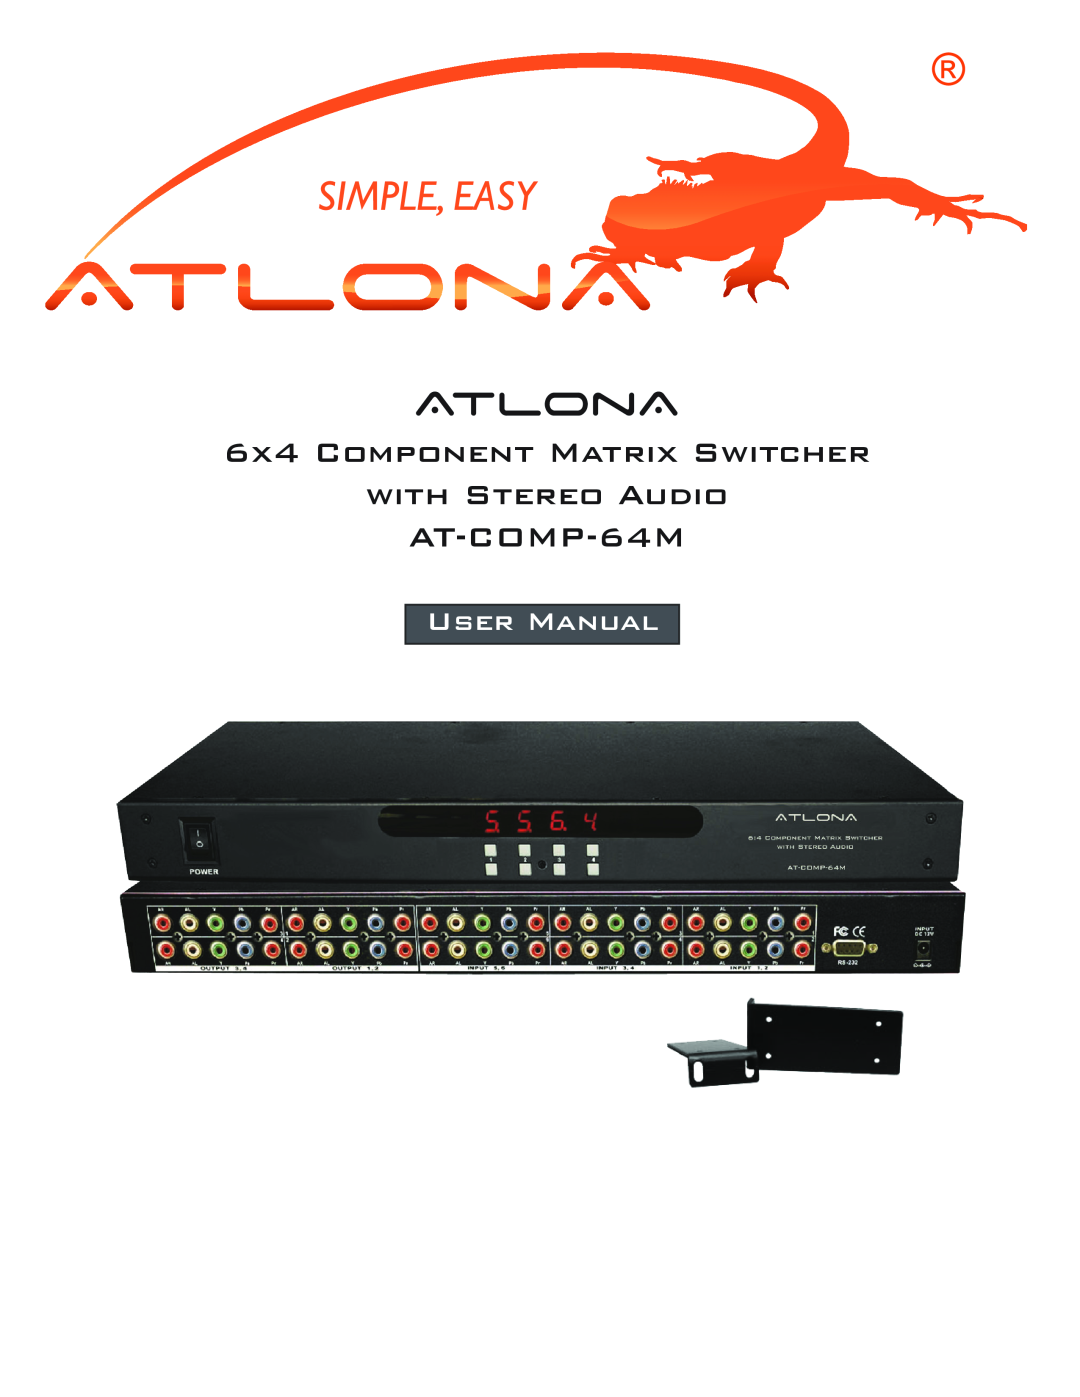 Atlona 64 M user manual Atlona, 6X4 COMPONENT MATRIX SWITCHER WITH STEREO AUDIO, AT-COMP-64M 